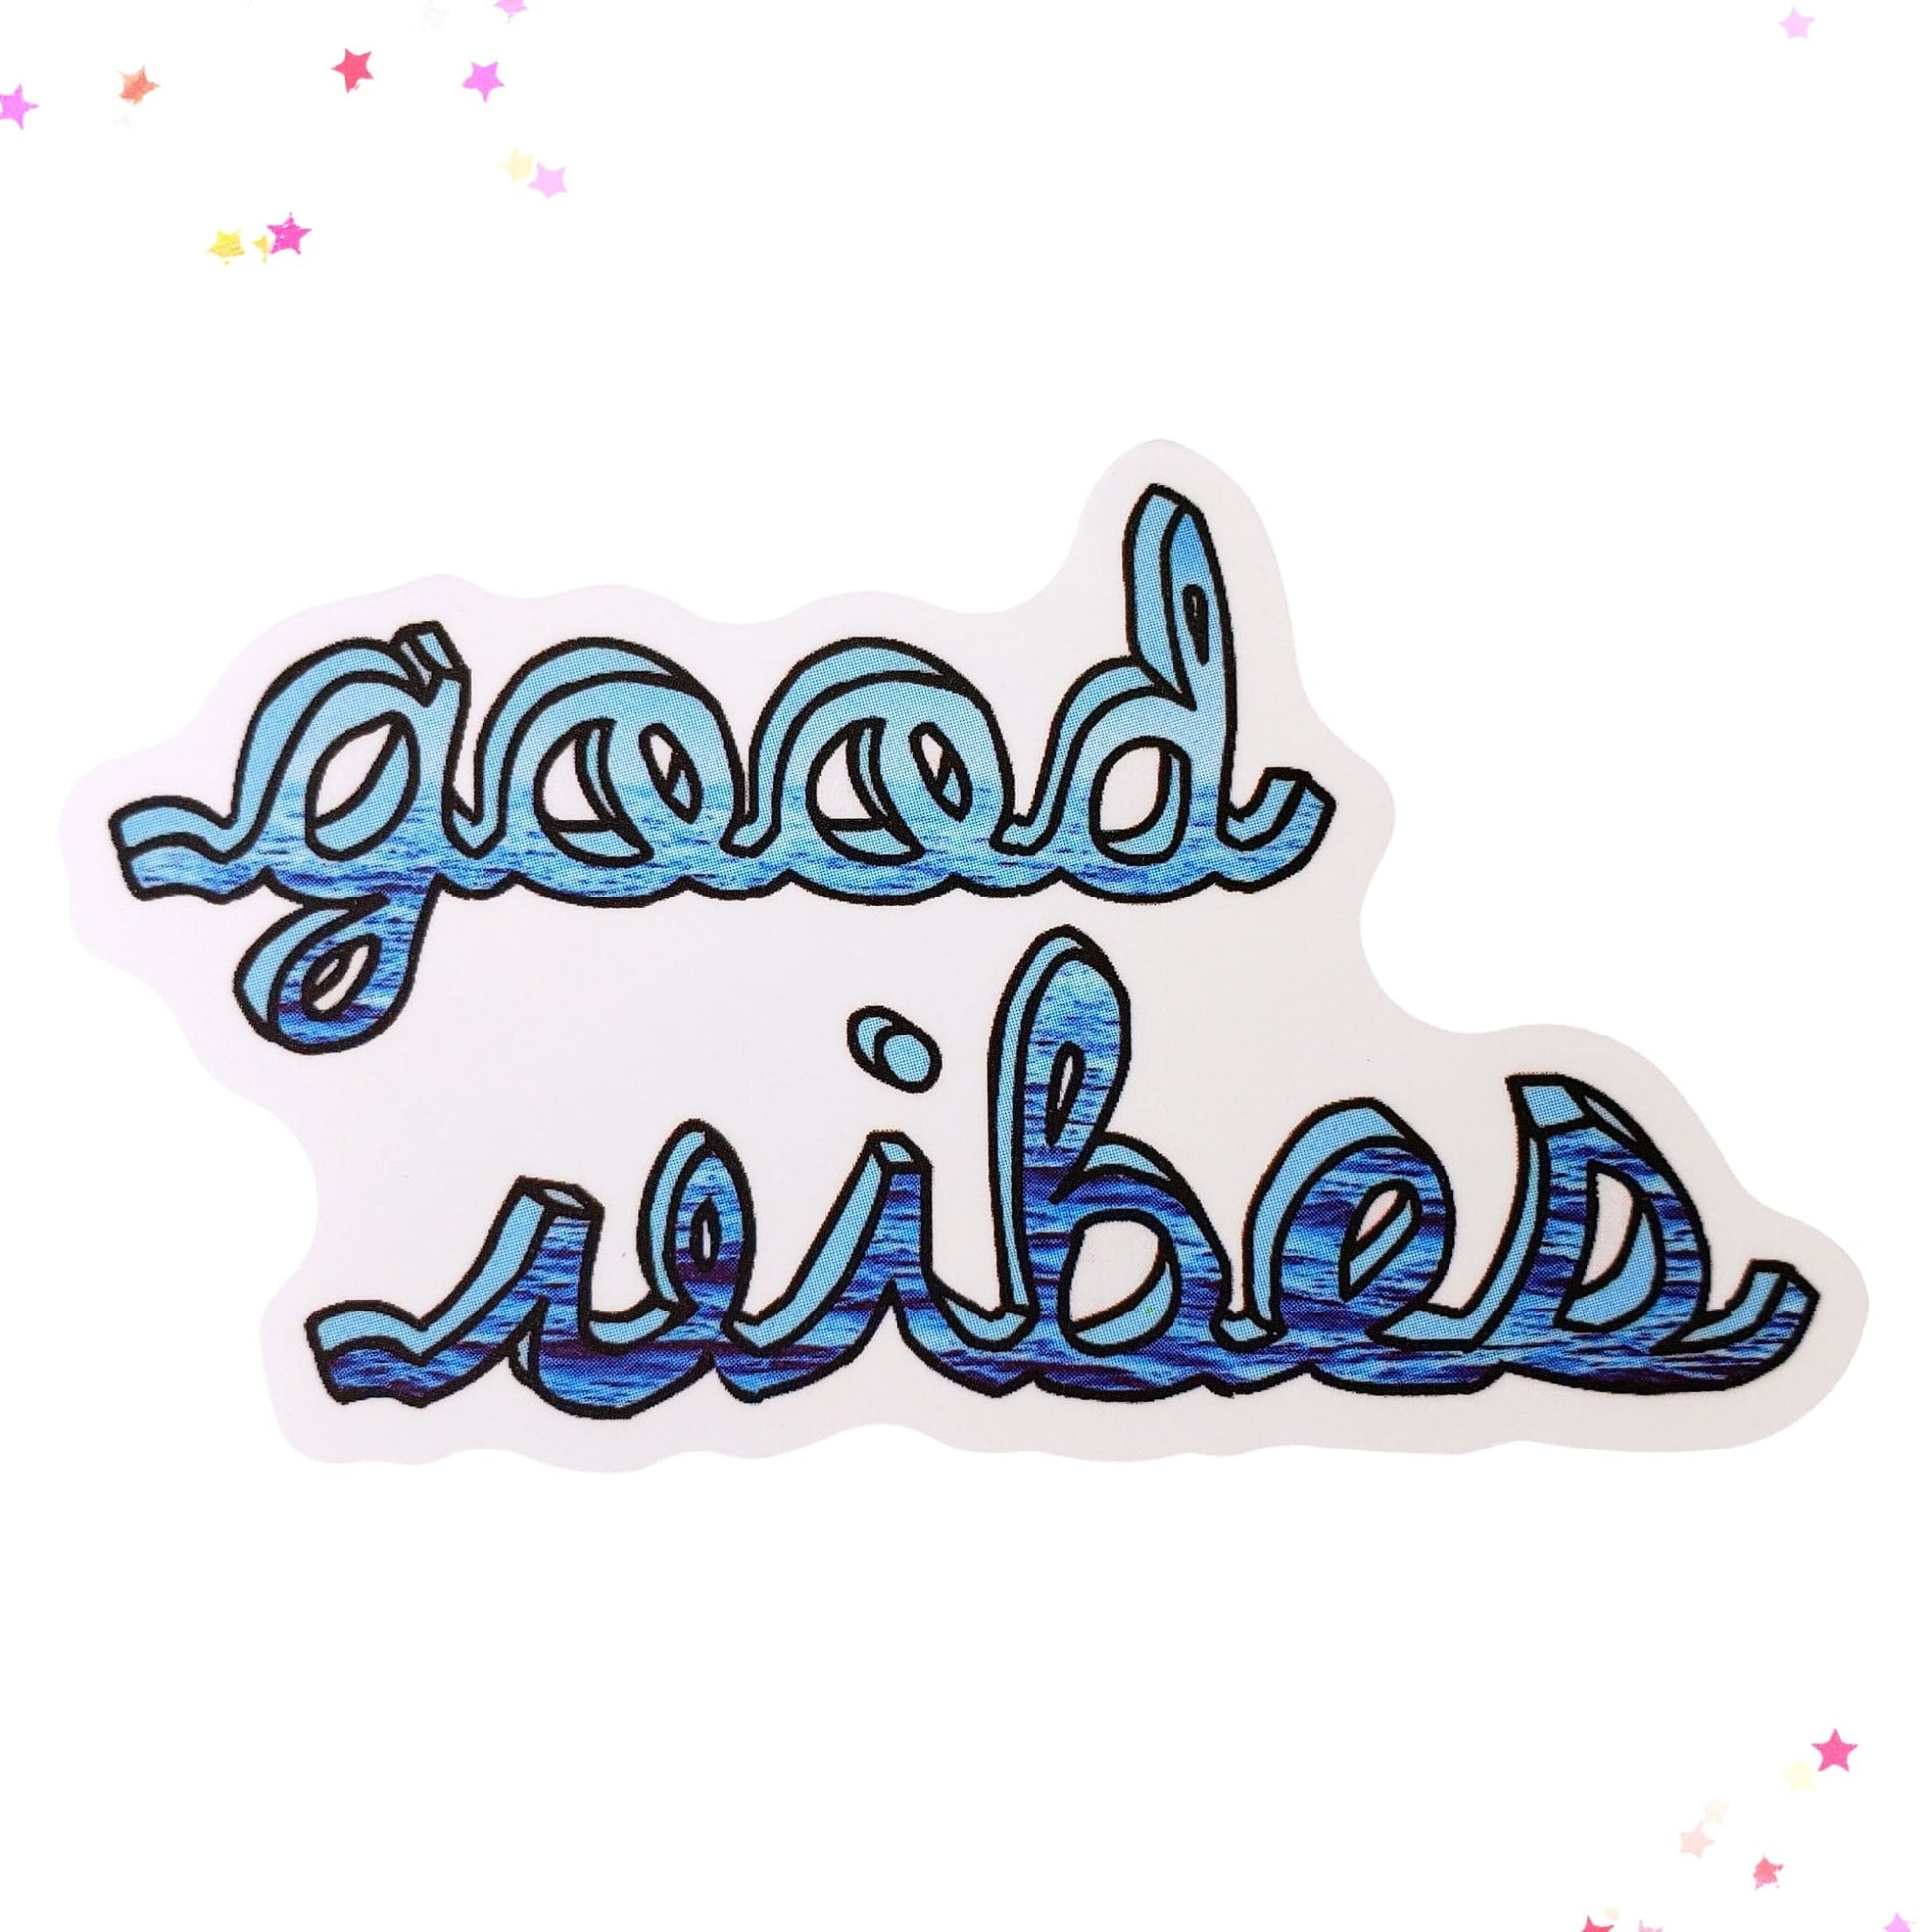 Good Vibes Waves Waterproof Sticker from Confetti Kitty, Only 1.00